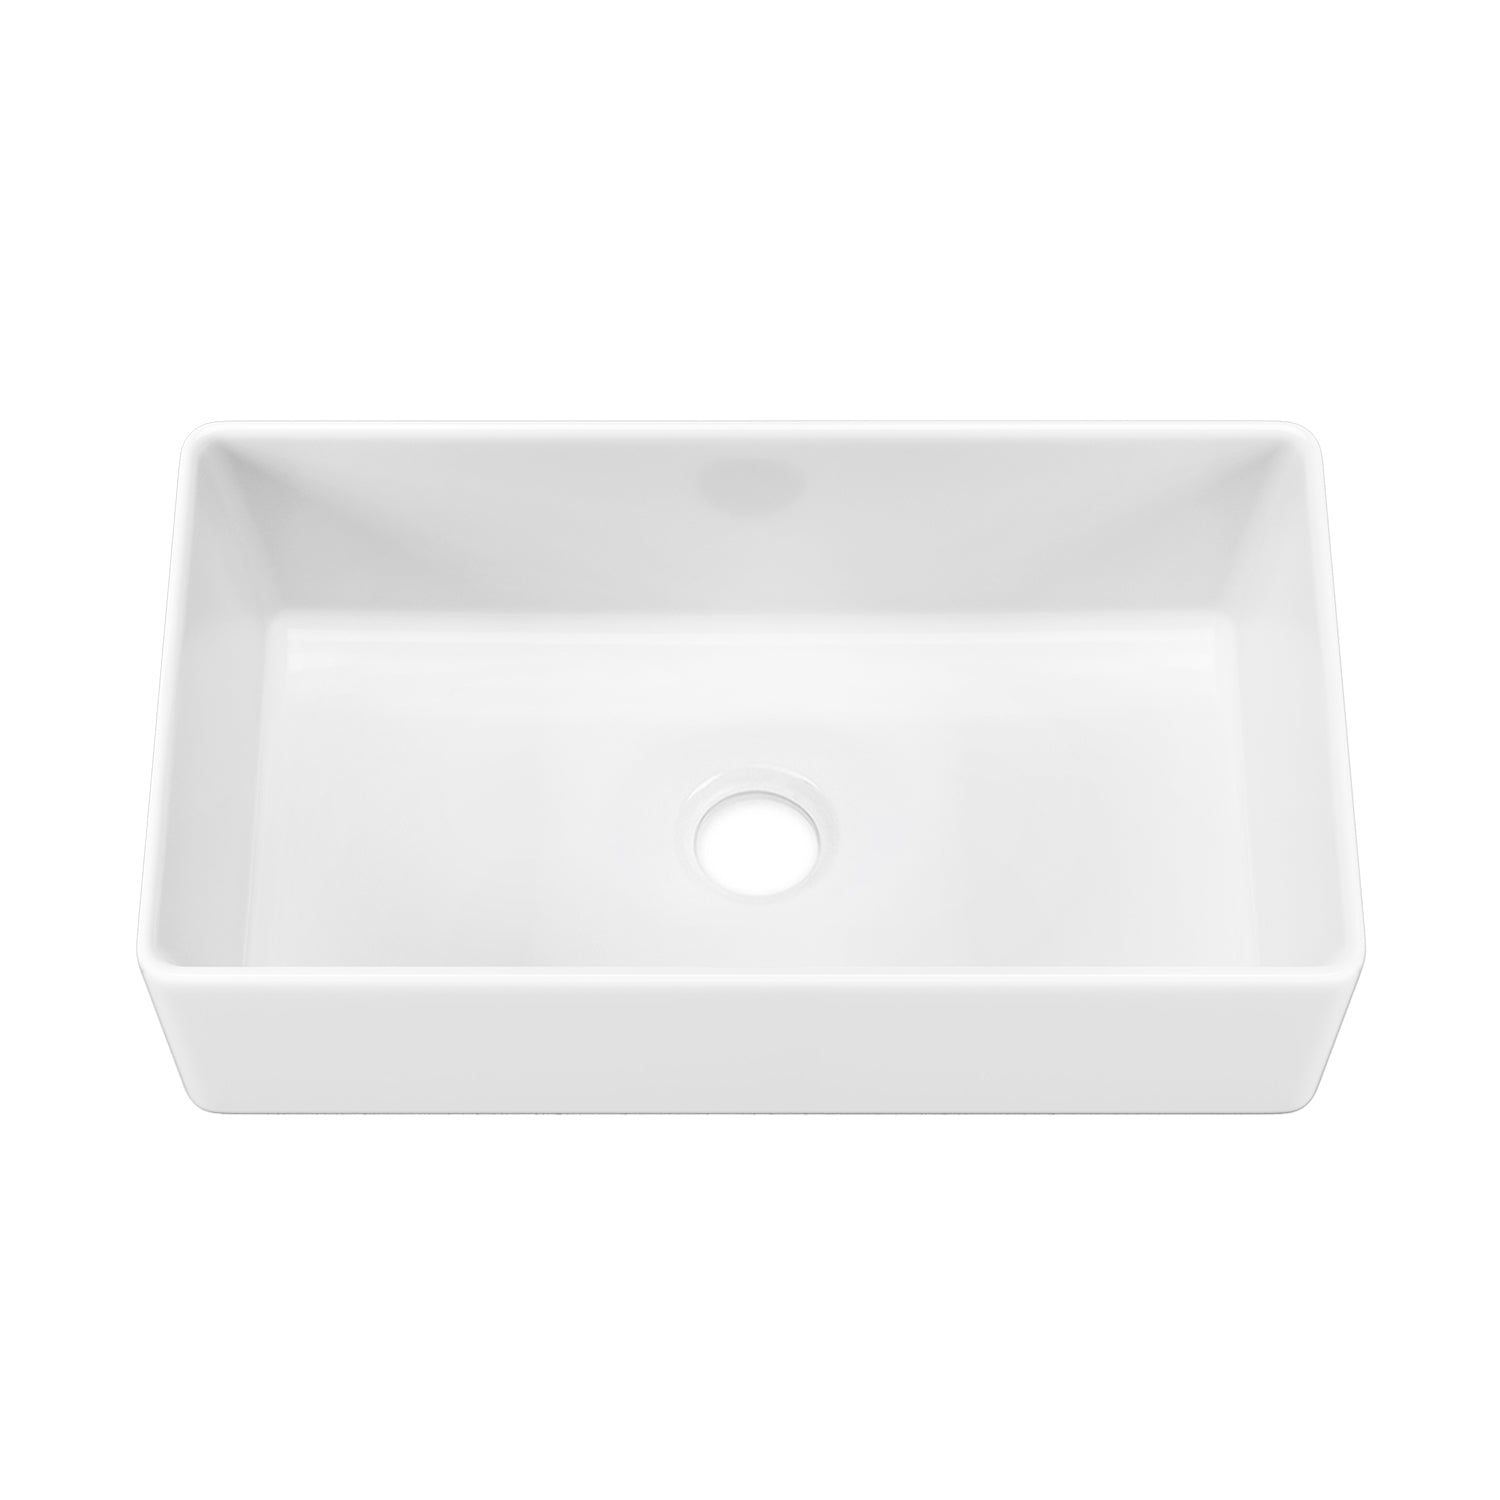 Sinber 36 Inch Farmhouse Apron Single Bowl Kitchen Sink with Fireclay White Finish 2 Accessories F3620S-OL